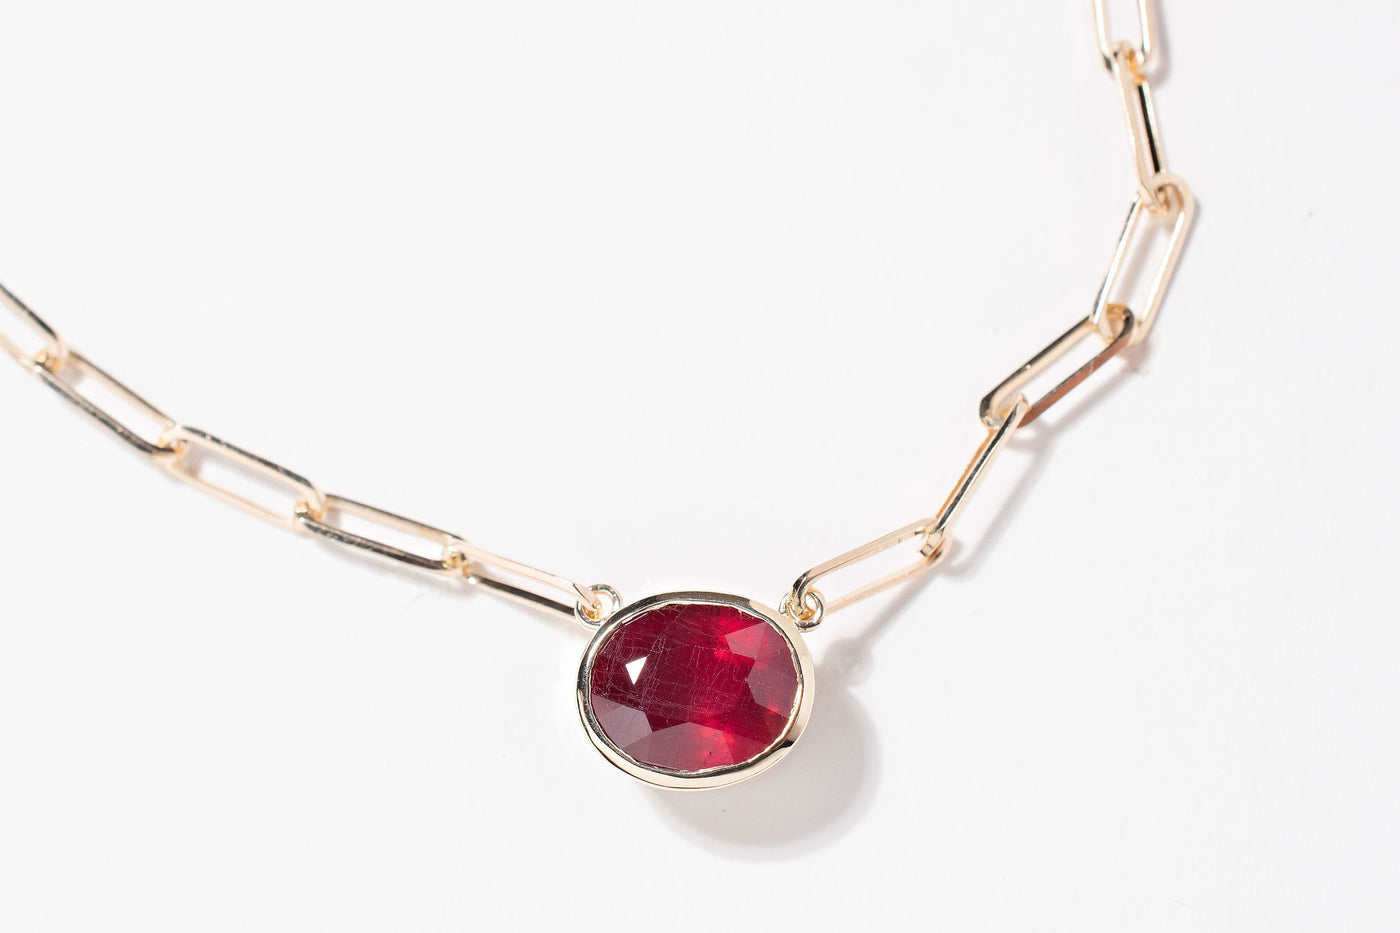 4ct Oval Ruby Necklace - 14k yellow gold